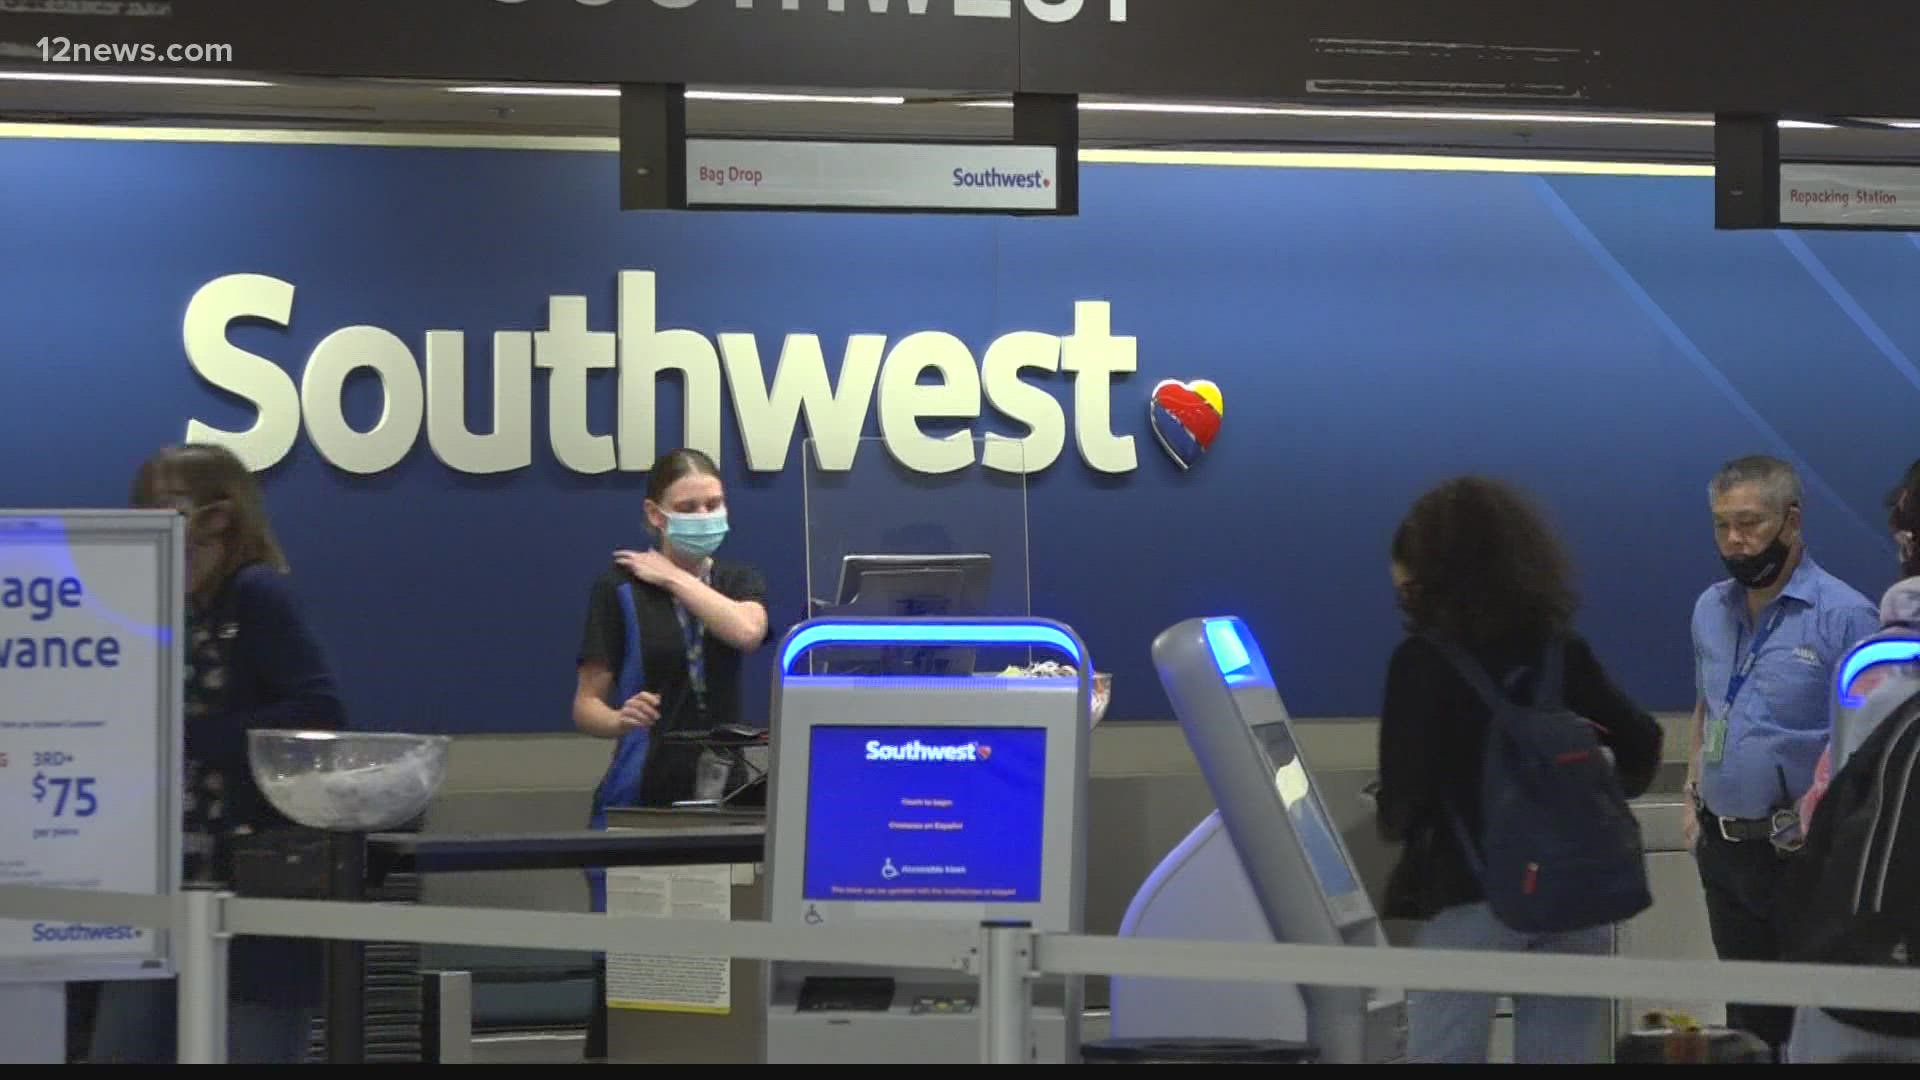 Travelers are still dealing with delays and cancellations after Southwest Airlines canceled thousands of flights. Here are your rights as a passenger when traveling.